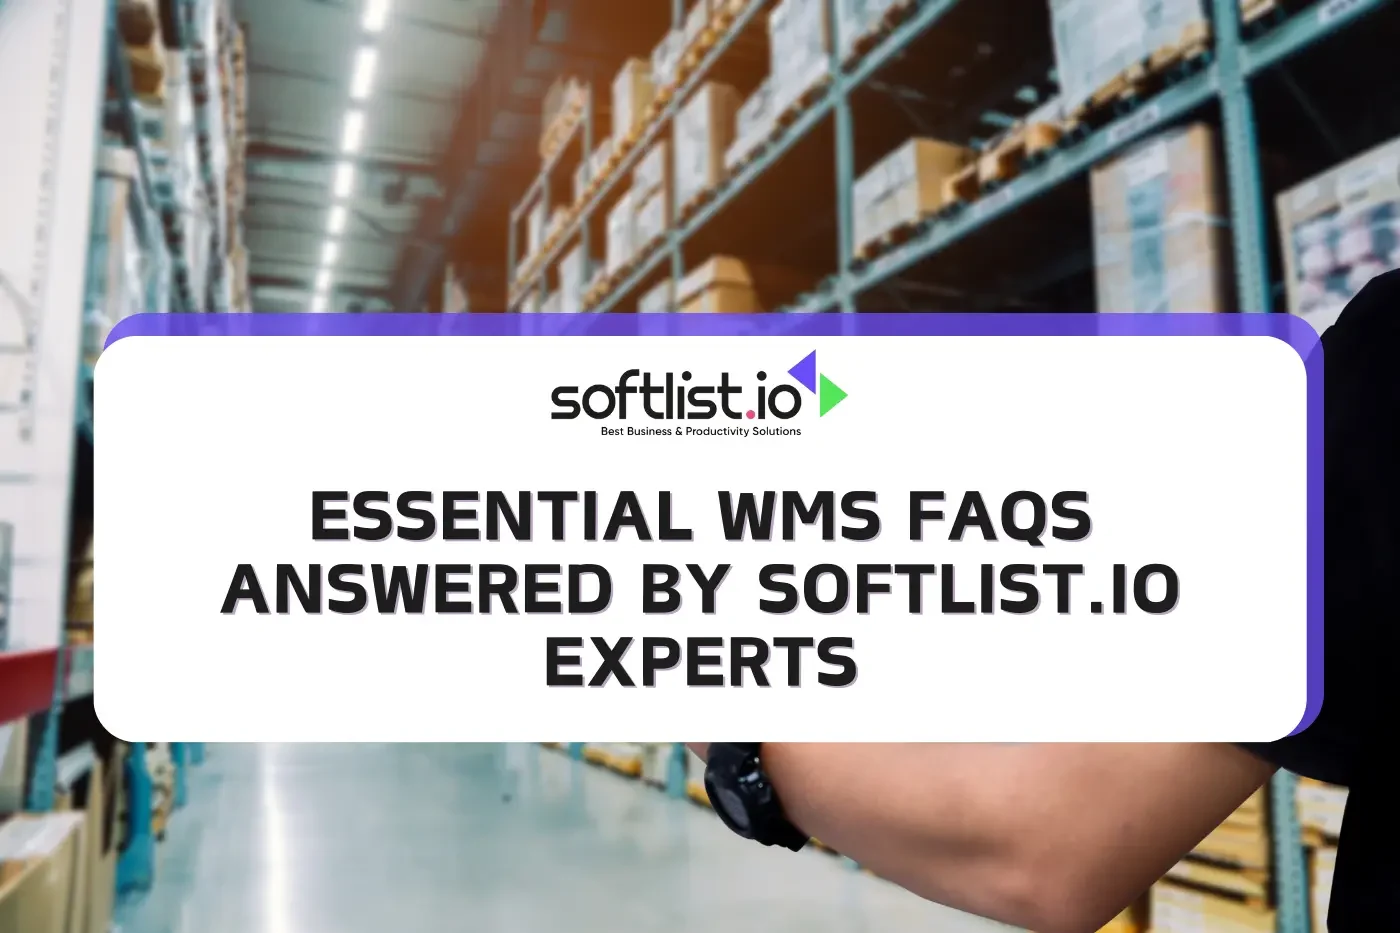 Essential WMS FAQs Answered by Softlist.io Experts